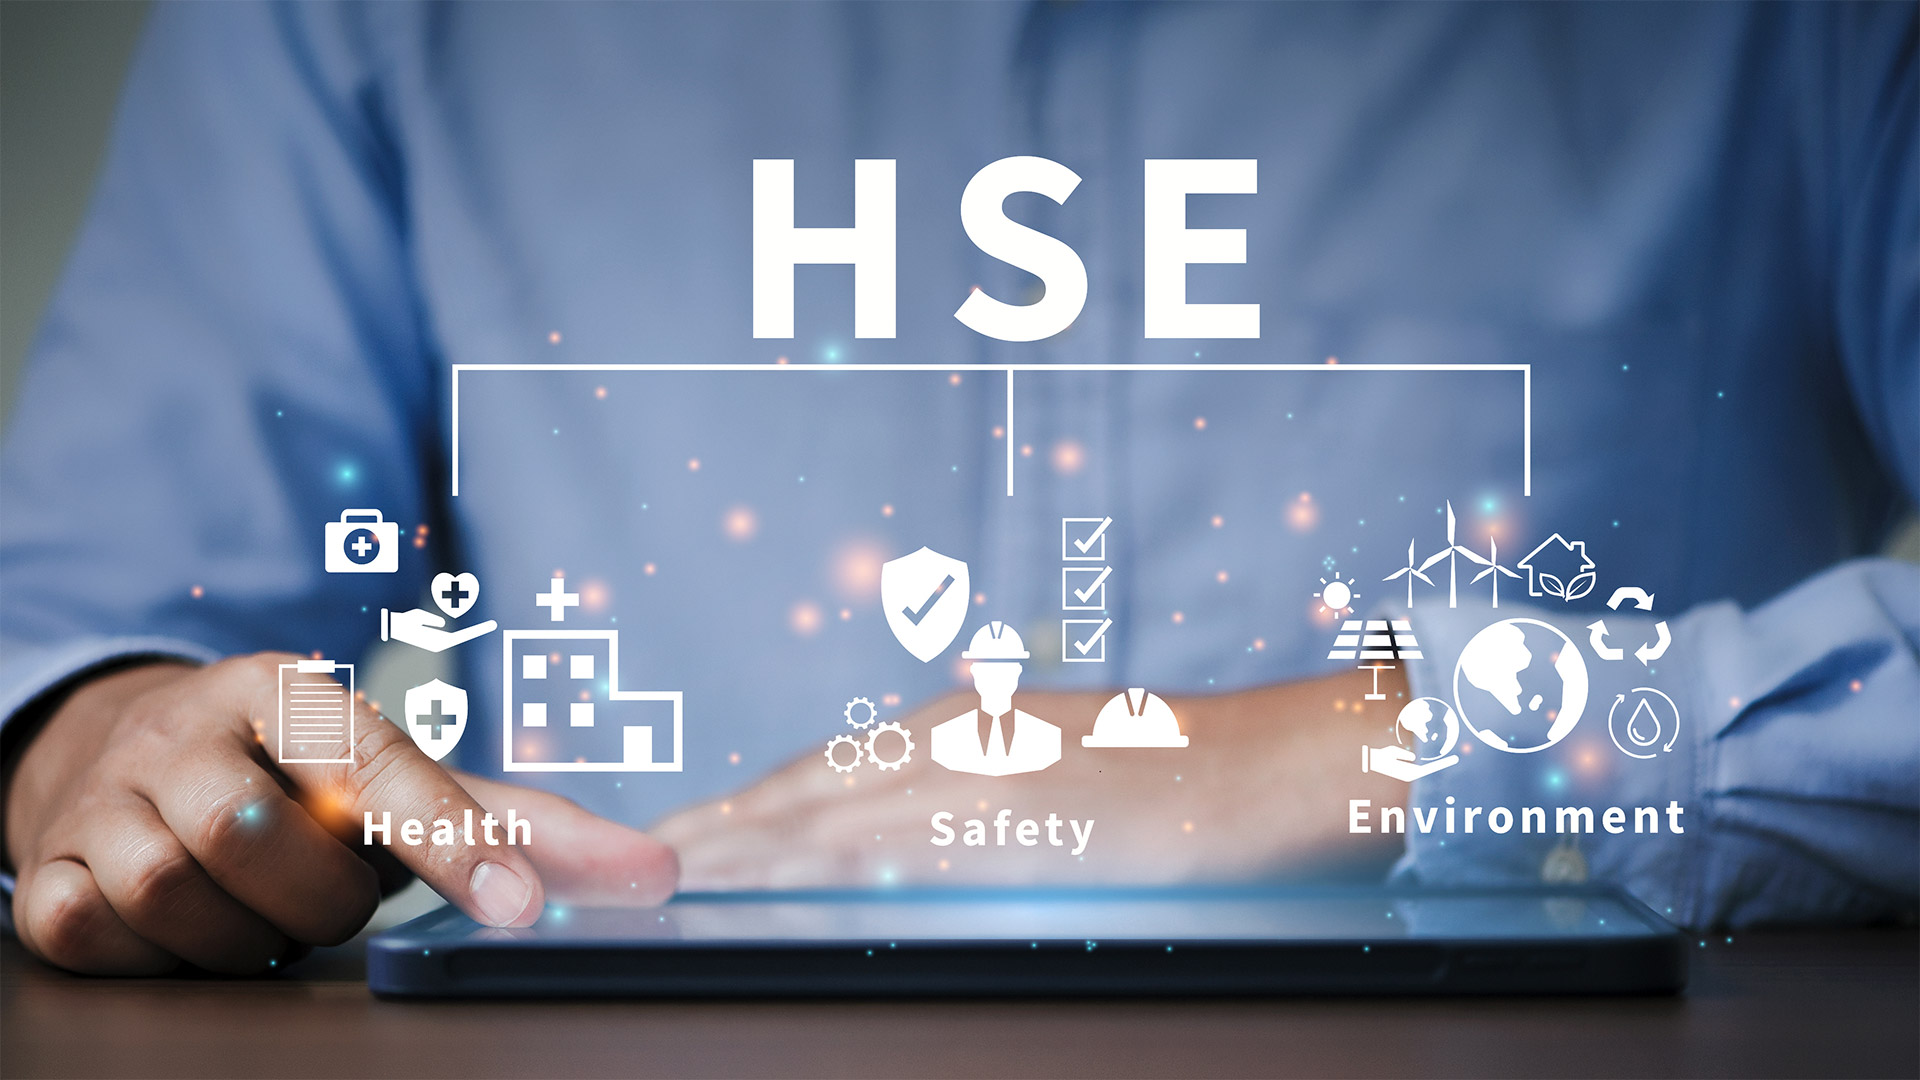 HSE Health Safety Environment